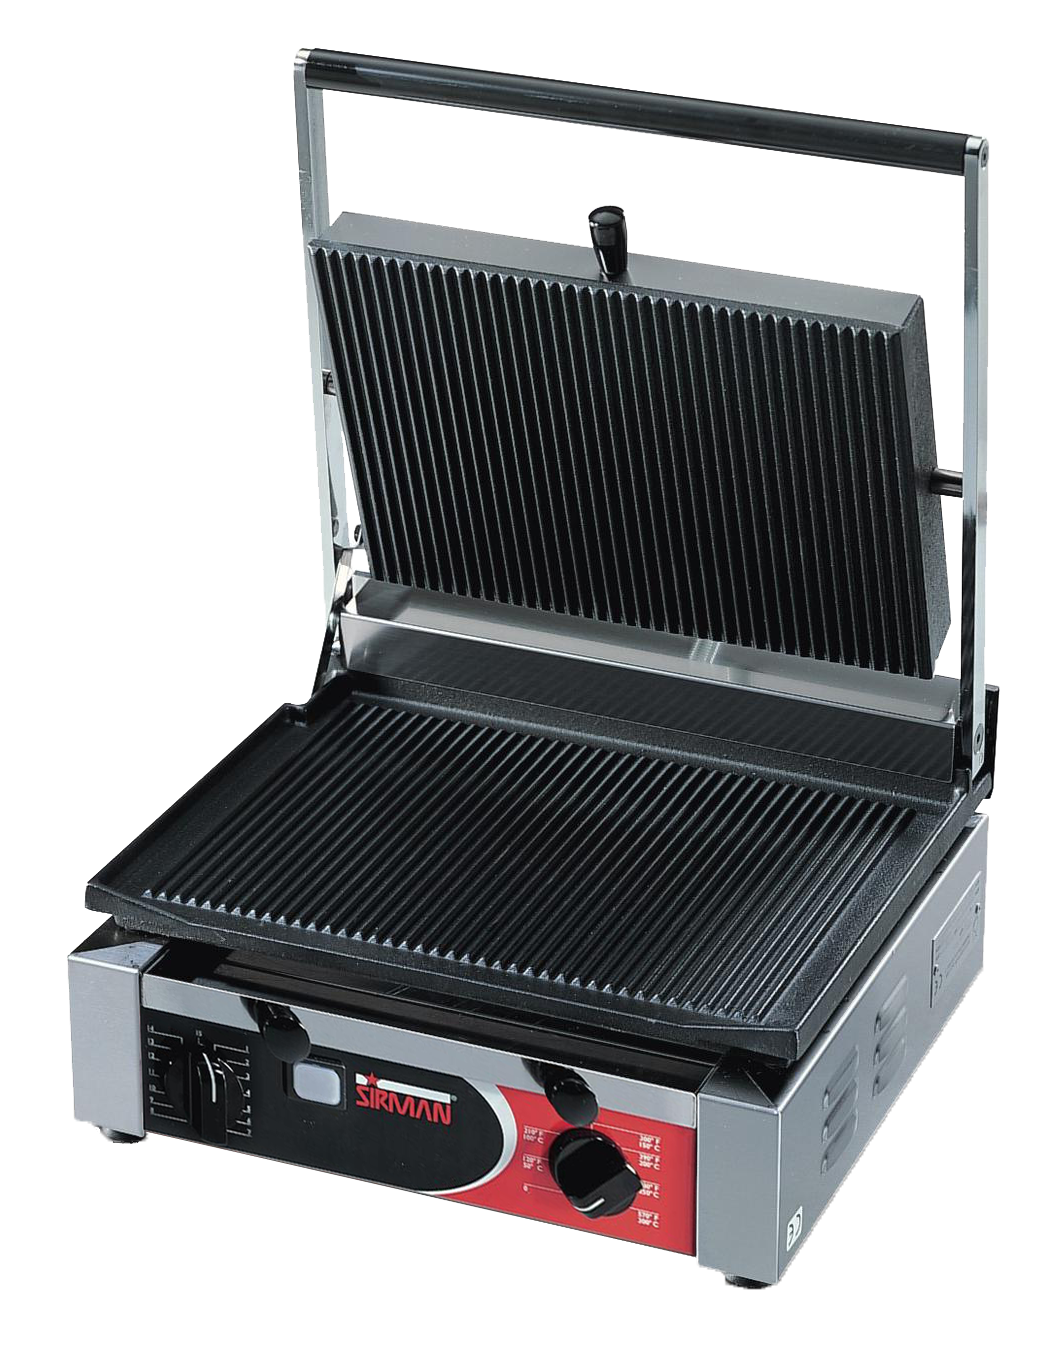 Sirman CORT L Single Panini Grill w/ Grooved Top & Grooved Bottom